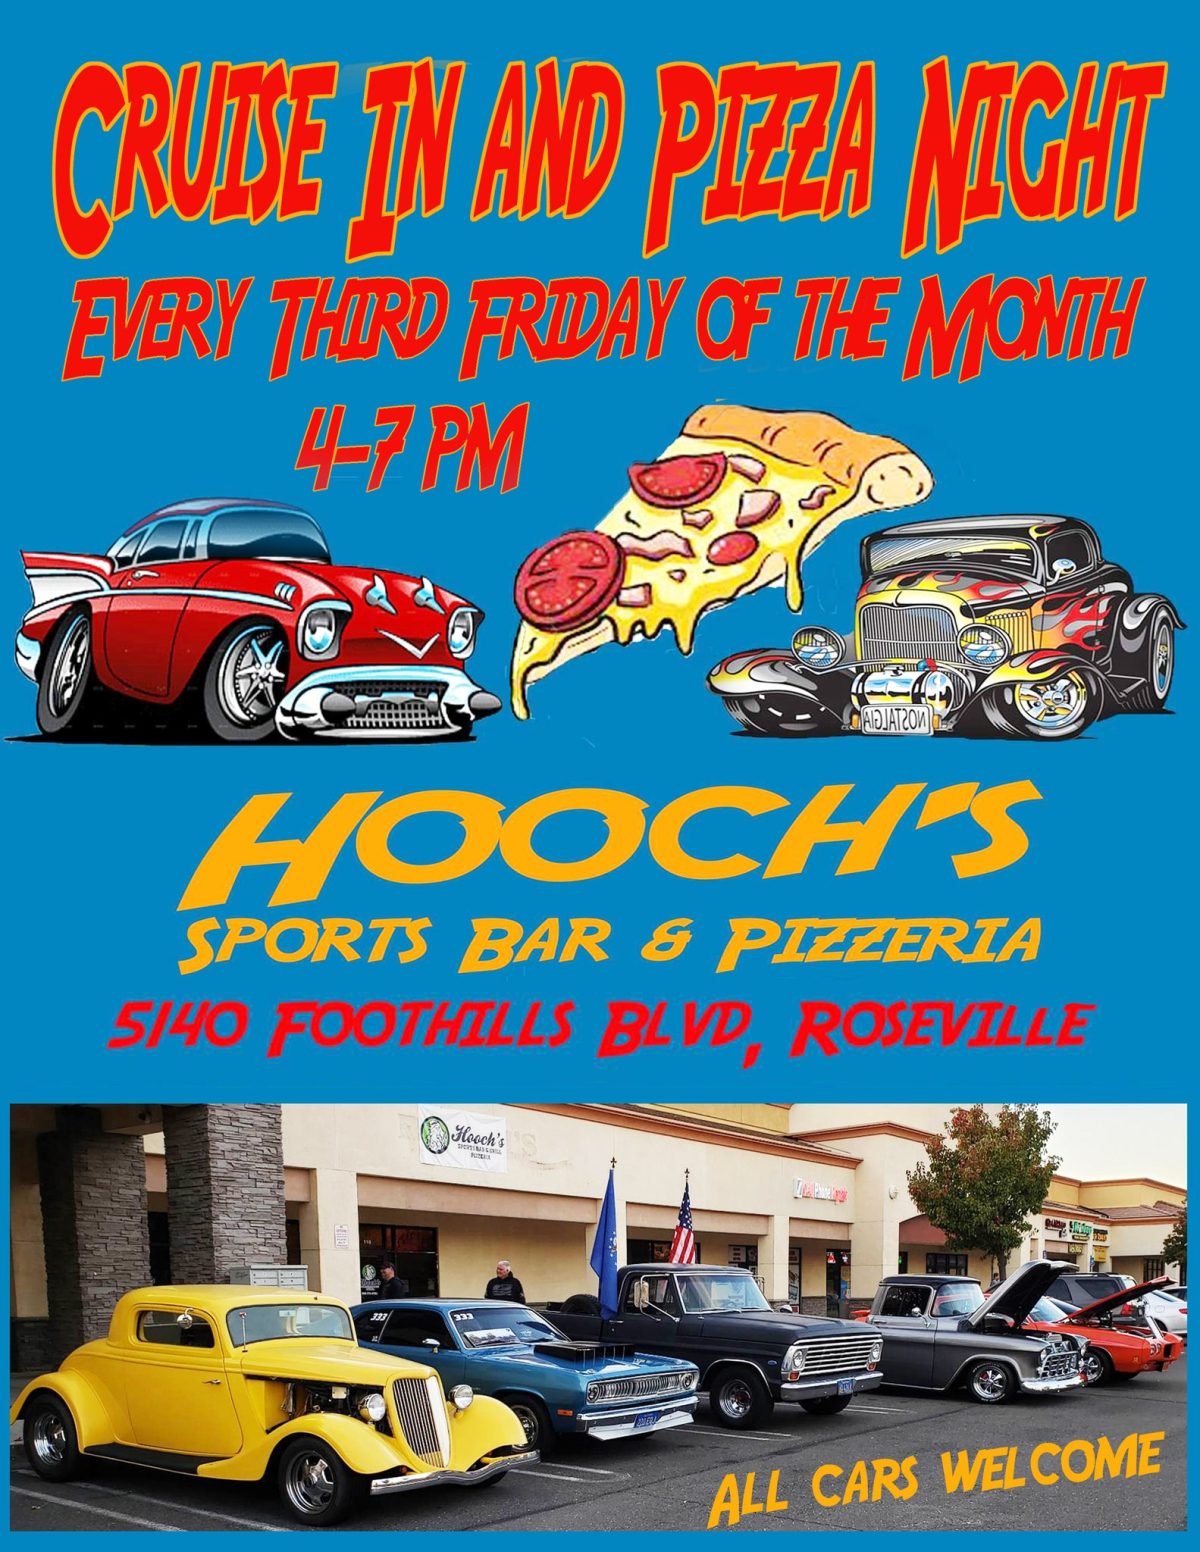 Hooch’s Cruise In and Pizza Night